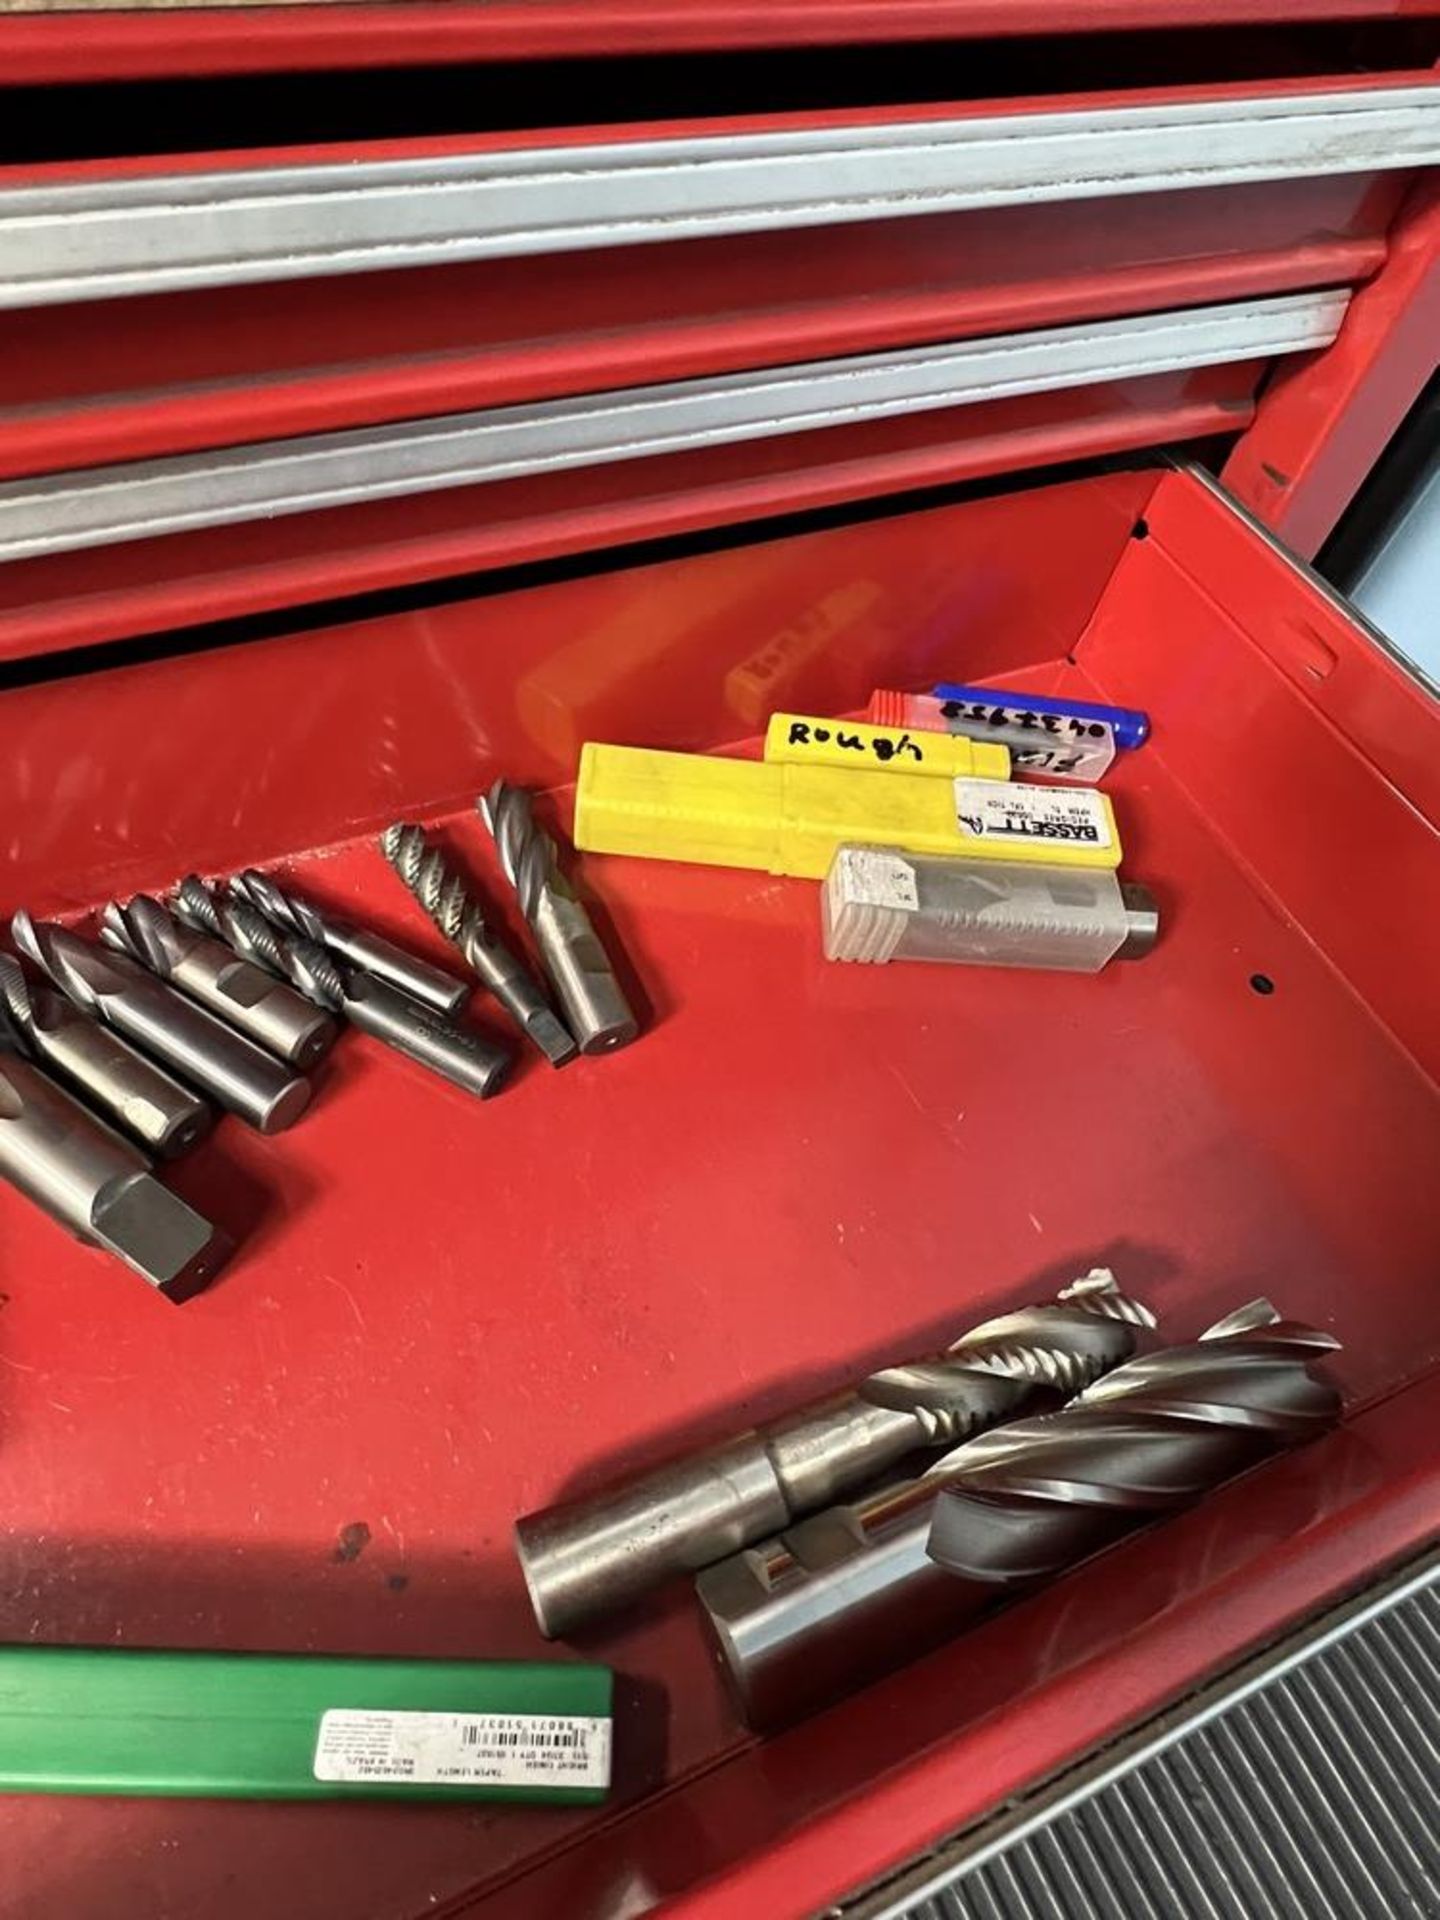 Waterloo Shop Series Tool Box Full of New & Used Counter Sinks, Small Drills, Special Tools, Small - Image 11 of 11